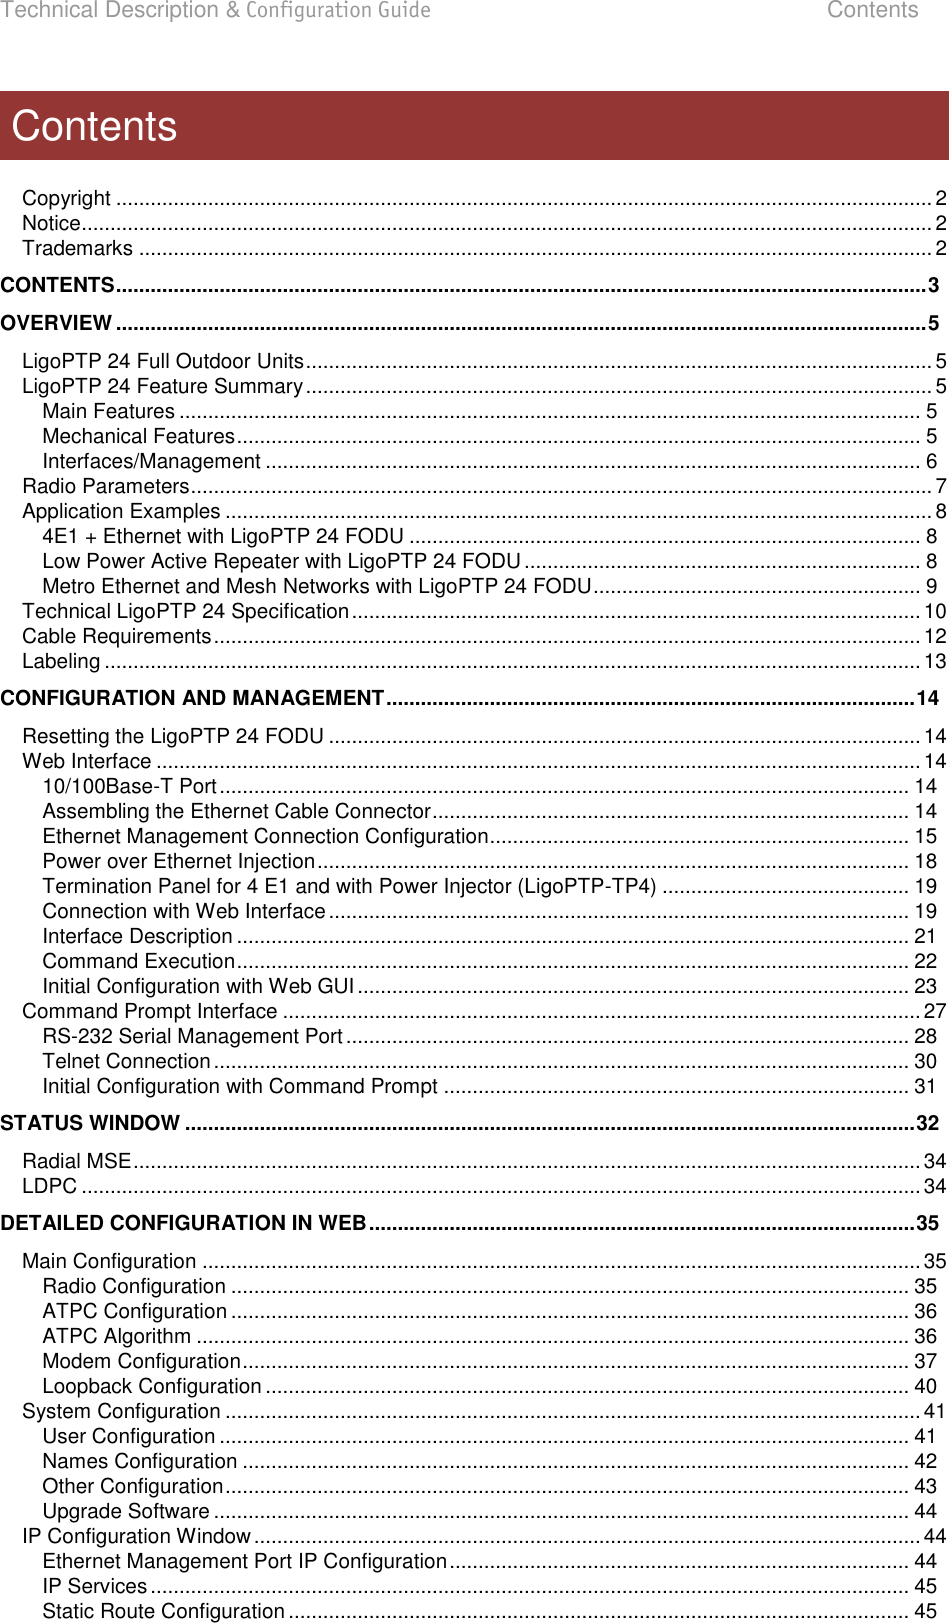 Technical Description &amp; Configuration Guide  Contents  LigoWave  Page 3  Copyright .............................................................................................................................................. 2 Notice .................................................................................................................................................... 2 Trademarks .......................................................................................................................................... 2 CONTENTS ............................................................................................................................................. 3 OVERVIEW ............................................................................................................................................. 5 LigoPTP 24 Full Outdoor Units ............................................................................................................. 5 LigoPTP 24 Feature Summary ............................................................................................................. 5 Main Features ................................................................................................................................. 5 Mechanical Features ....................................................................................................................... 5 Interfaces/Management .................................................................................................................. 6 Radio Parameters ................................................................................................................................. 7 Application Examples ........................................................................................................................... 8 4E1 + Ethernet with LigoPTP 24 FODU ......................................................................................... 8 Low Power Active Repeater with LigoPTP 24 FODU ..................................................................... 8 Metro Ethernet and Mesh Networks with LigoPTP 24 FODU ......................................................... 9 Technical LigoPTP 24 Specification ................................................................................................... 10 Cable Requirements ........................................................................................................................... 12 Labeling .............................................................................................................................................. 13 CONFIGURATION AND MANAGEMENT ............................................................................................ 14 Resetting the LigoPTP 24 FODU ....................................................................................................... 14 Web Interface ..................................................................................................................................... 14 10/100Base-T Port ........................................................................................................................ 14 Assembling the Ethernet Cable Connector ................................................................................... 14 Ethernet Management Connection Configuration......................................................................... 15 Power over Ethernet Injection ....................................................................................................... 18 Termination Panel for 4 E1 and with Power Injector (LigoPTP-TP4) ........................................... 19 Connection with Web Interface ..................................................................................................... 19 Interface Description ..................................................................................................................... 21 Command Execution ..................................................................................................................... 22 Initial Configuration with Web GUI ................................................................................................ 23 Command Prompt Interface ............................................................................................................... 27 RS-232 Serial Management Port .................................................................................................. 28 Telnet Connection ......................................................................................................................... 30 Initial Configuration with Command Prompt ................................................................................. 31 STATUS WINDOW ............................................................................................................................... 32 Radial MSE ......................................................................................................................................... 34 LDPC .................................................................................................................................................. 34 DETAILED CONFIGURATION IN WEB ............................................................................................... 35 Main Configuration ............................................................................................................................. 35 Radio Configuration ...................................................................................................................... 35 ATPC Configuration ...................................................................................................................... 36 ATPC Algorithm ............................................................................................................................ 36 Modem Configuration .................................................................................................................... 37 Loopback Configuration ................................................................................................................ 40 System Configuration ......................................................................................................................... 41 User Configuration ........................................................................................................................ 41 Names Configuration .................................................................................................................... 42 Other Configuration ....................................................................................................................... 43 Upgrade Software ......................................................................................................................... 44 IP Configuration Window .................................................................................................................... 44 Ethernet Management Port IP Configuration ................................................................................ 44 IP Services .................................................................................................................................... 45 Static Route Configuration ............................................................................................................ 45 Contents 